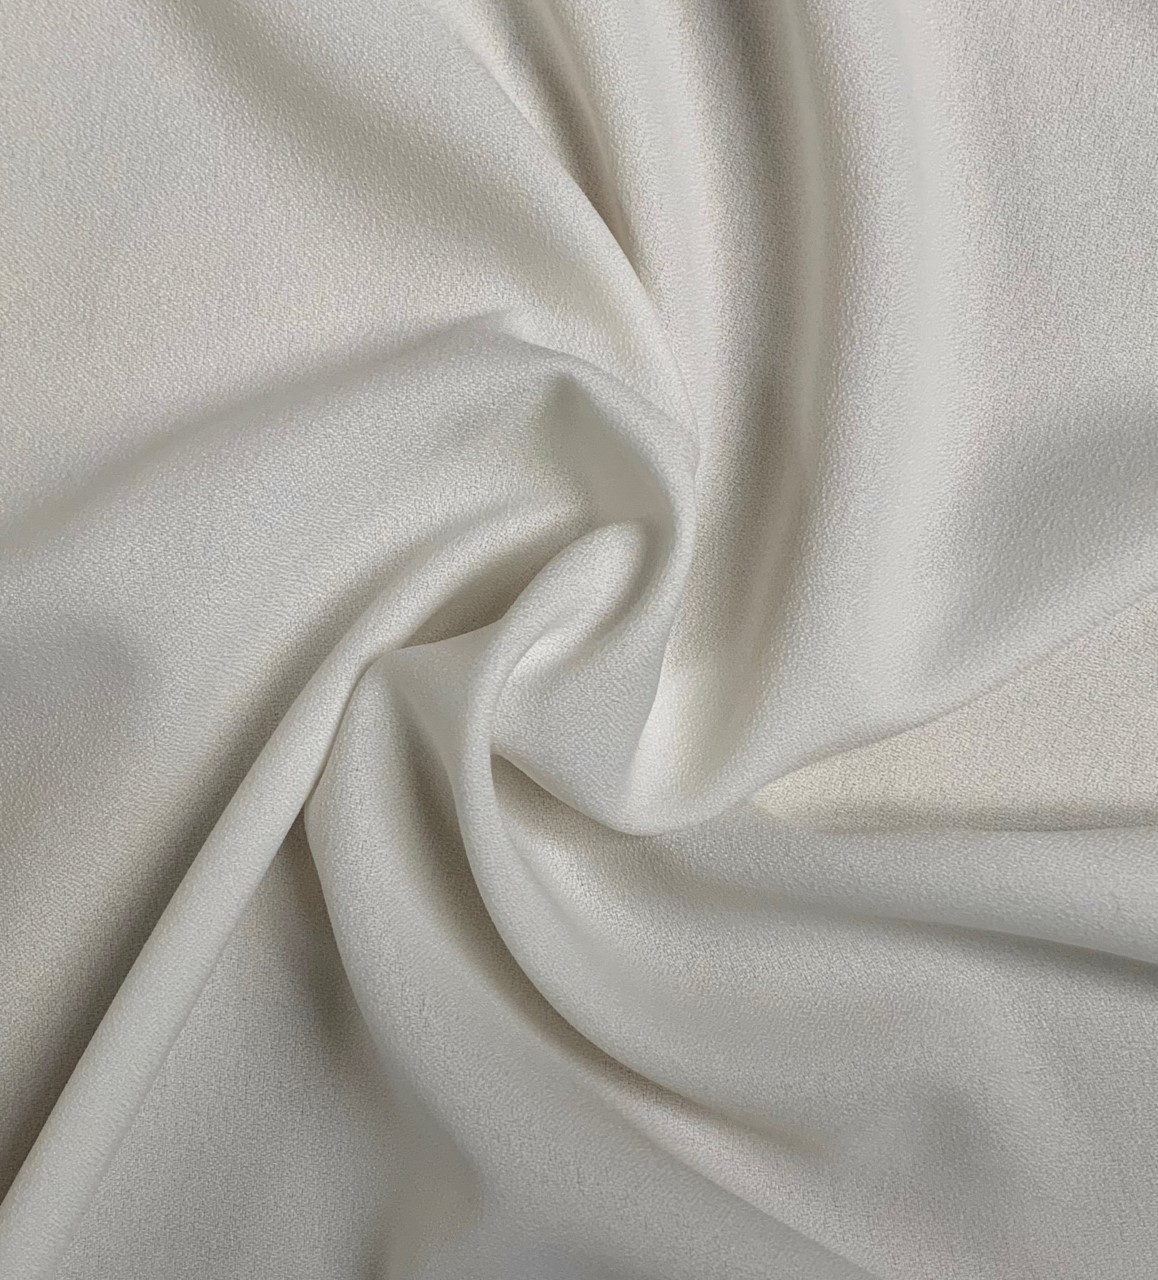 Off-White Crepe Fabric -60" By the yard (100% Polyester)